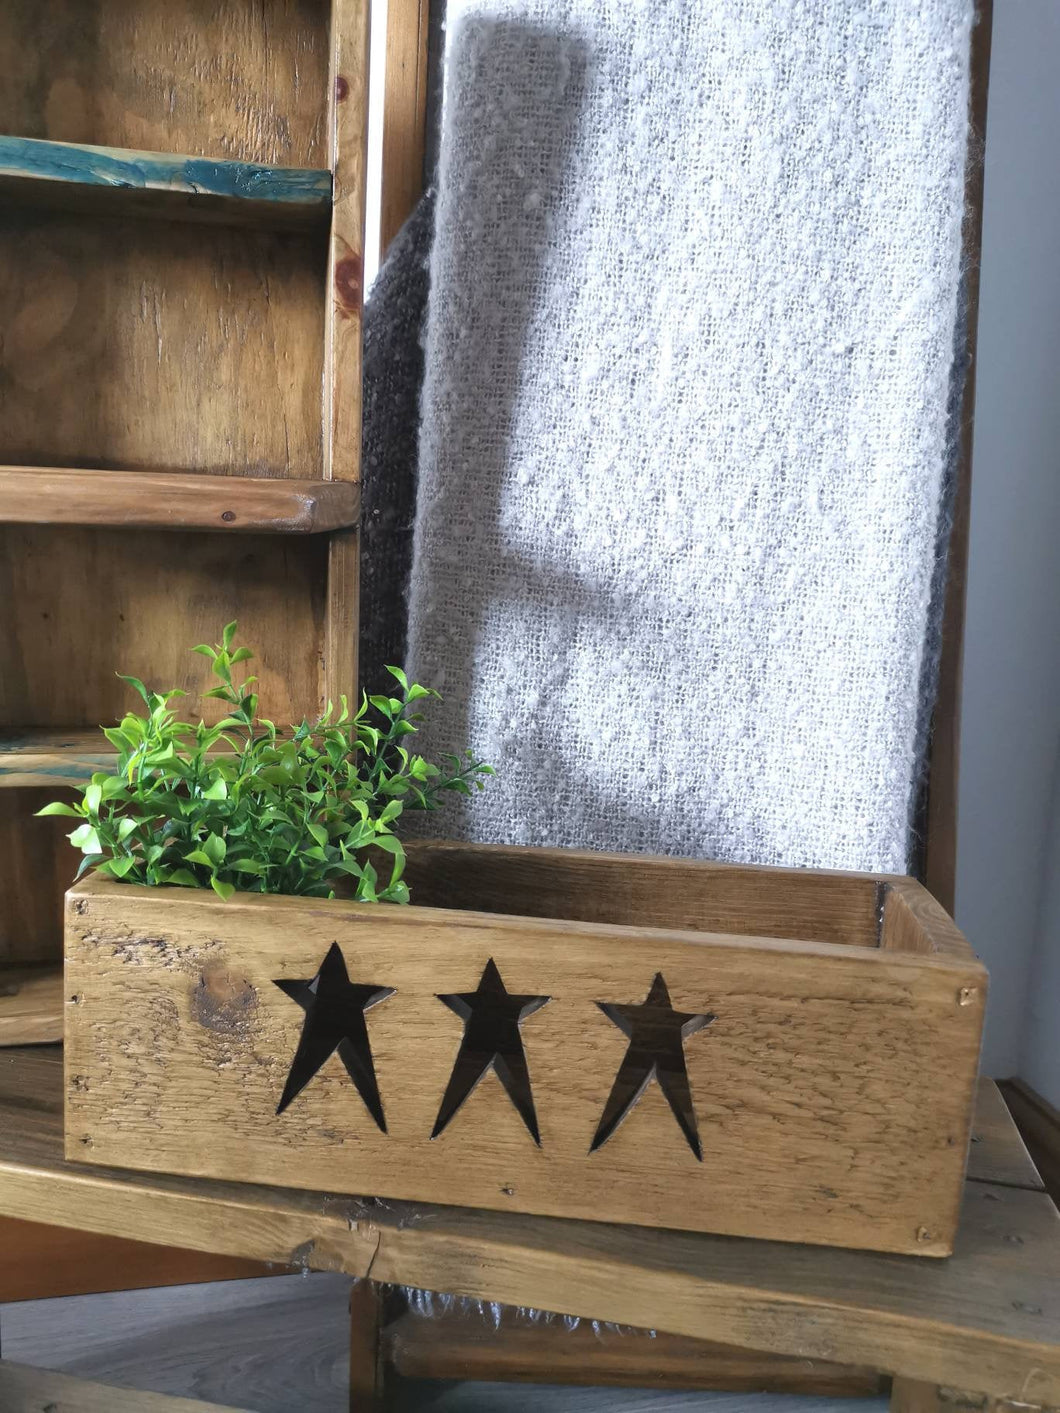 Wood Crate storage Trug, Farmhouse, Made from reclaimed wood, Centerpiece, Home decor